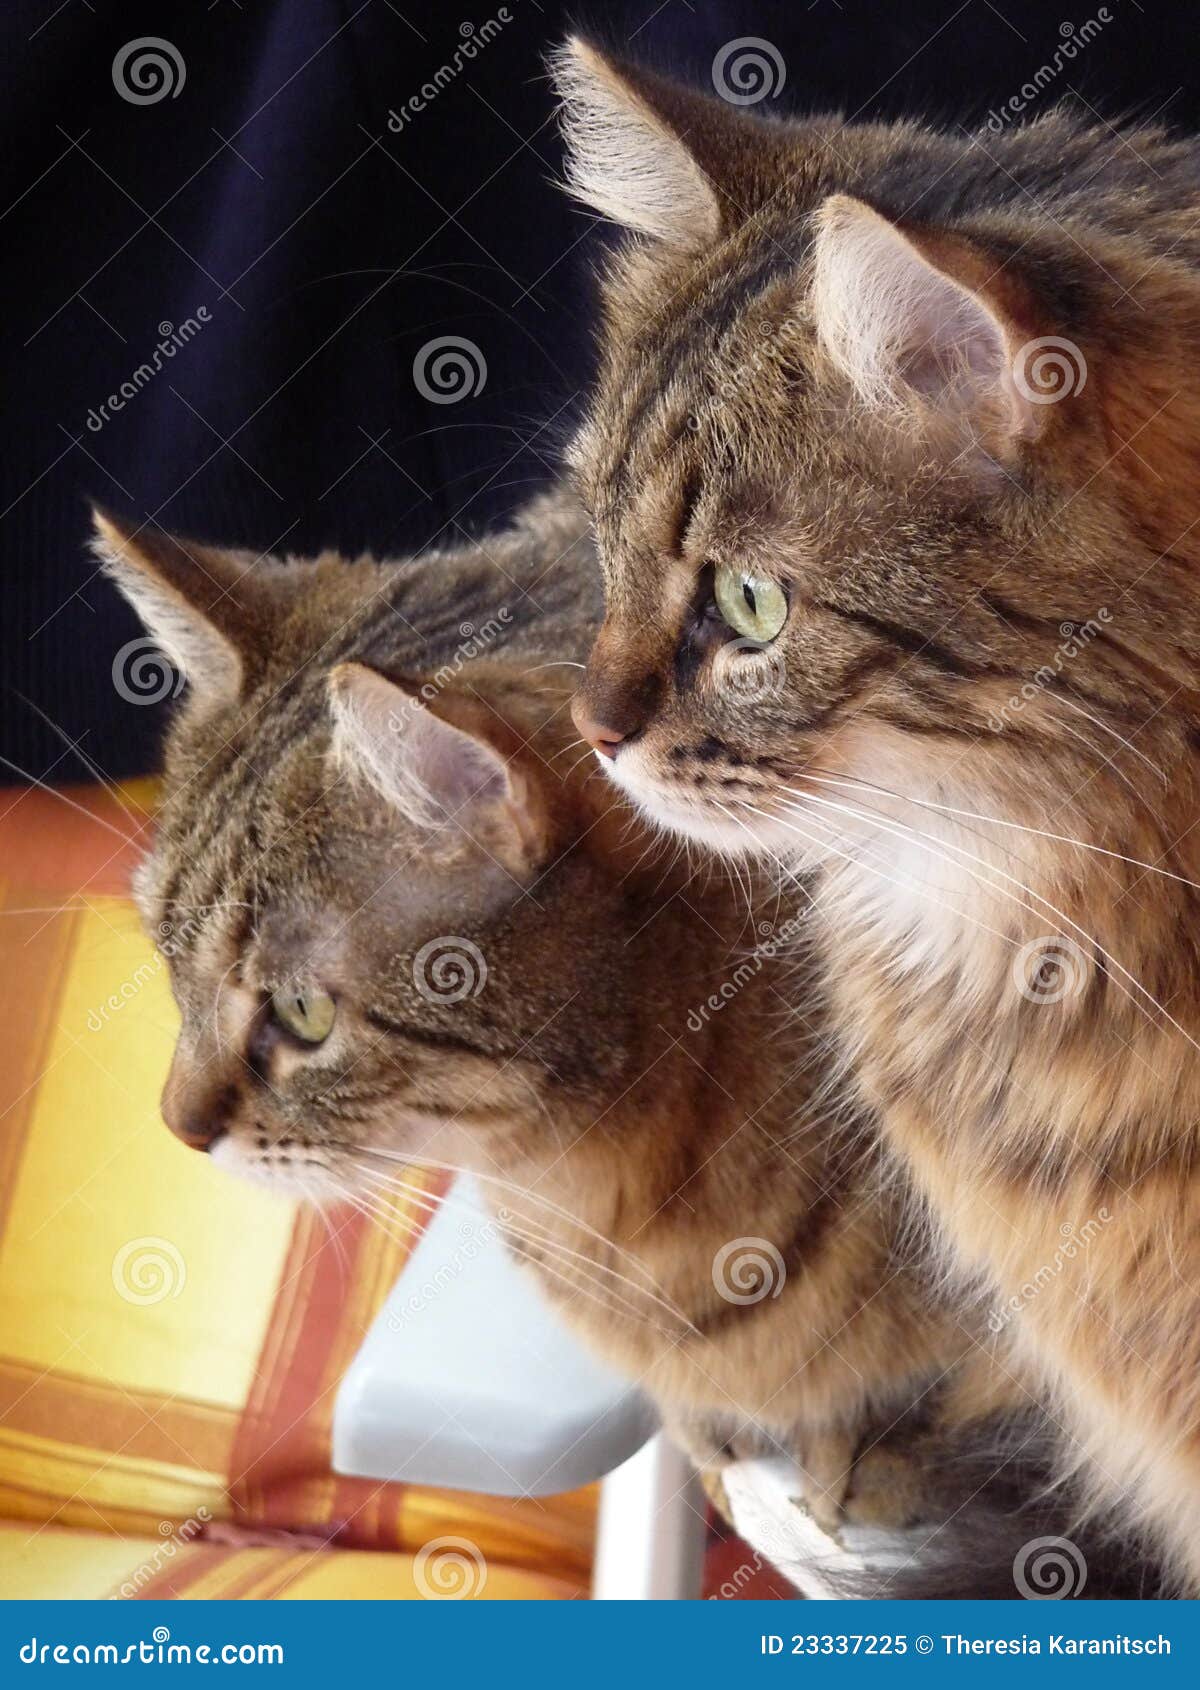 A Couple Of Cats Royalty Free Stock Photo - Image: 23337225